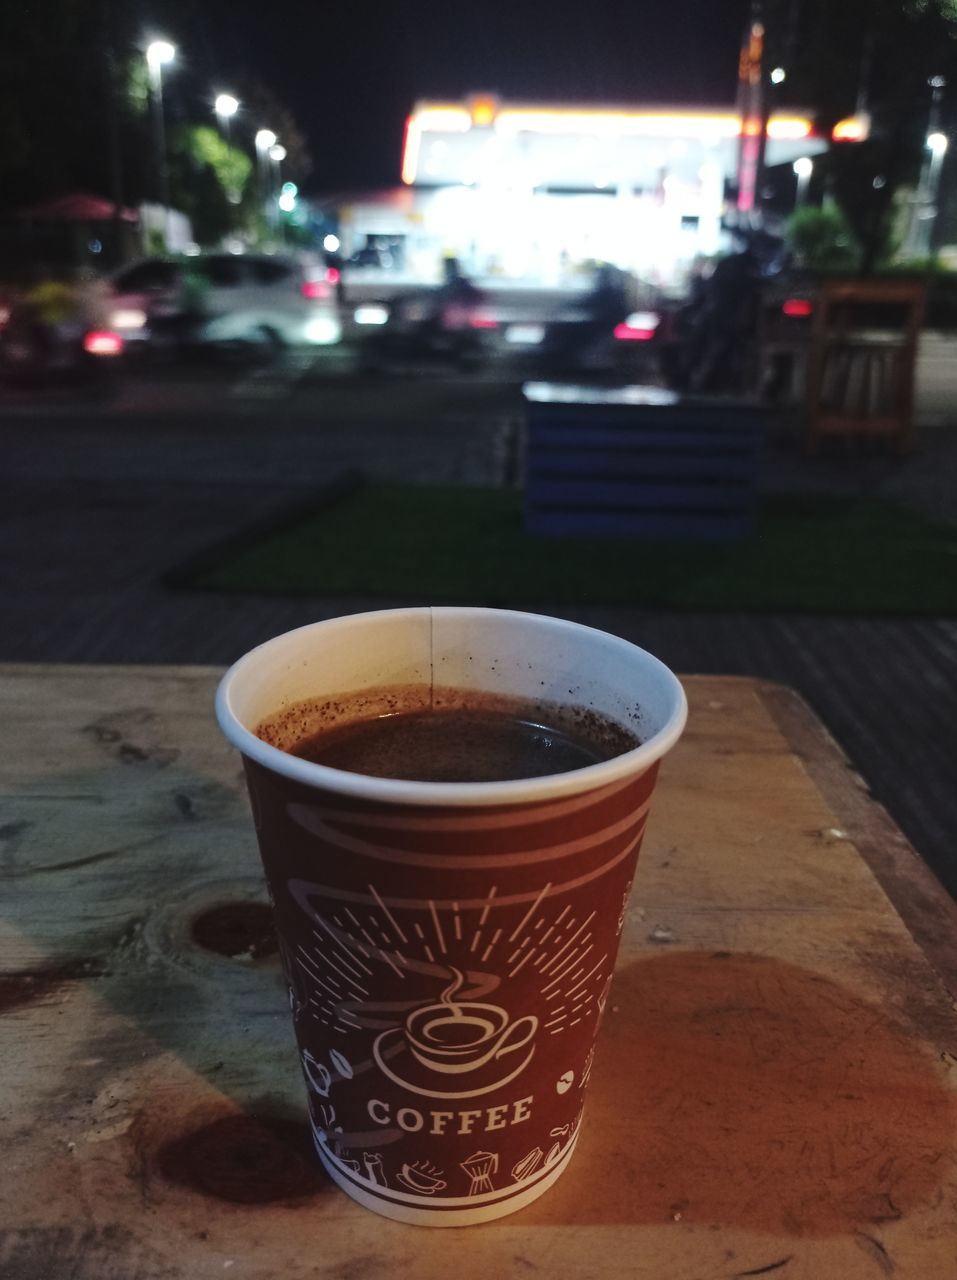 drink, food and drink, cup, refreshment, mug, coffee, focus on foreground, city, coffee cup, street, table, hot drink, car, no people, night, lighting, vehicle, food